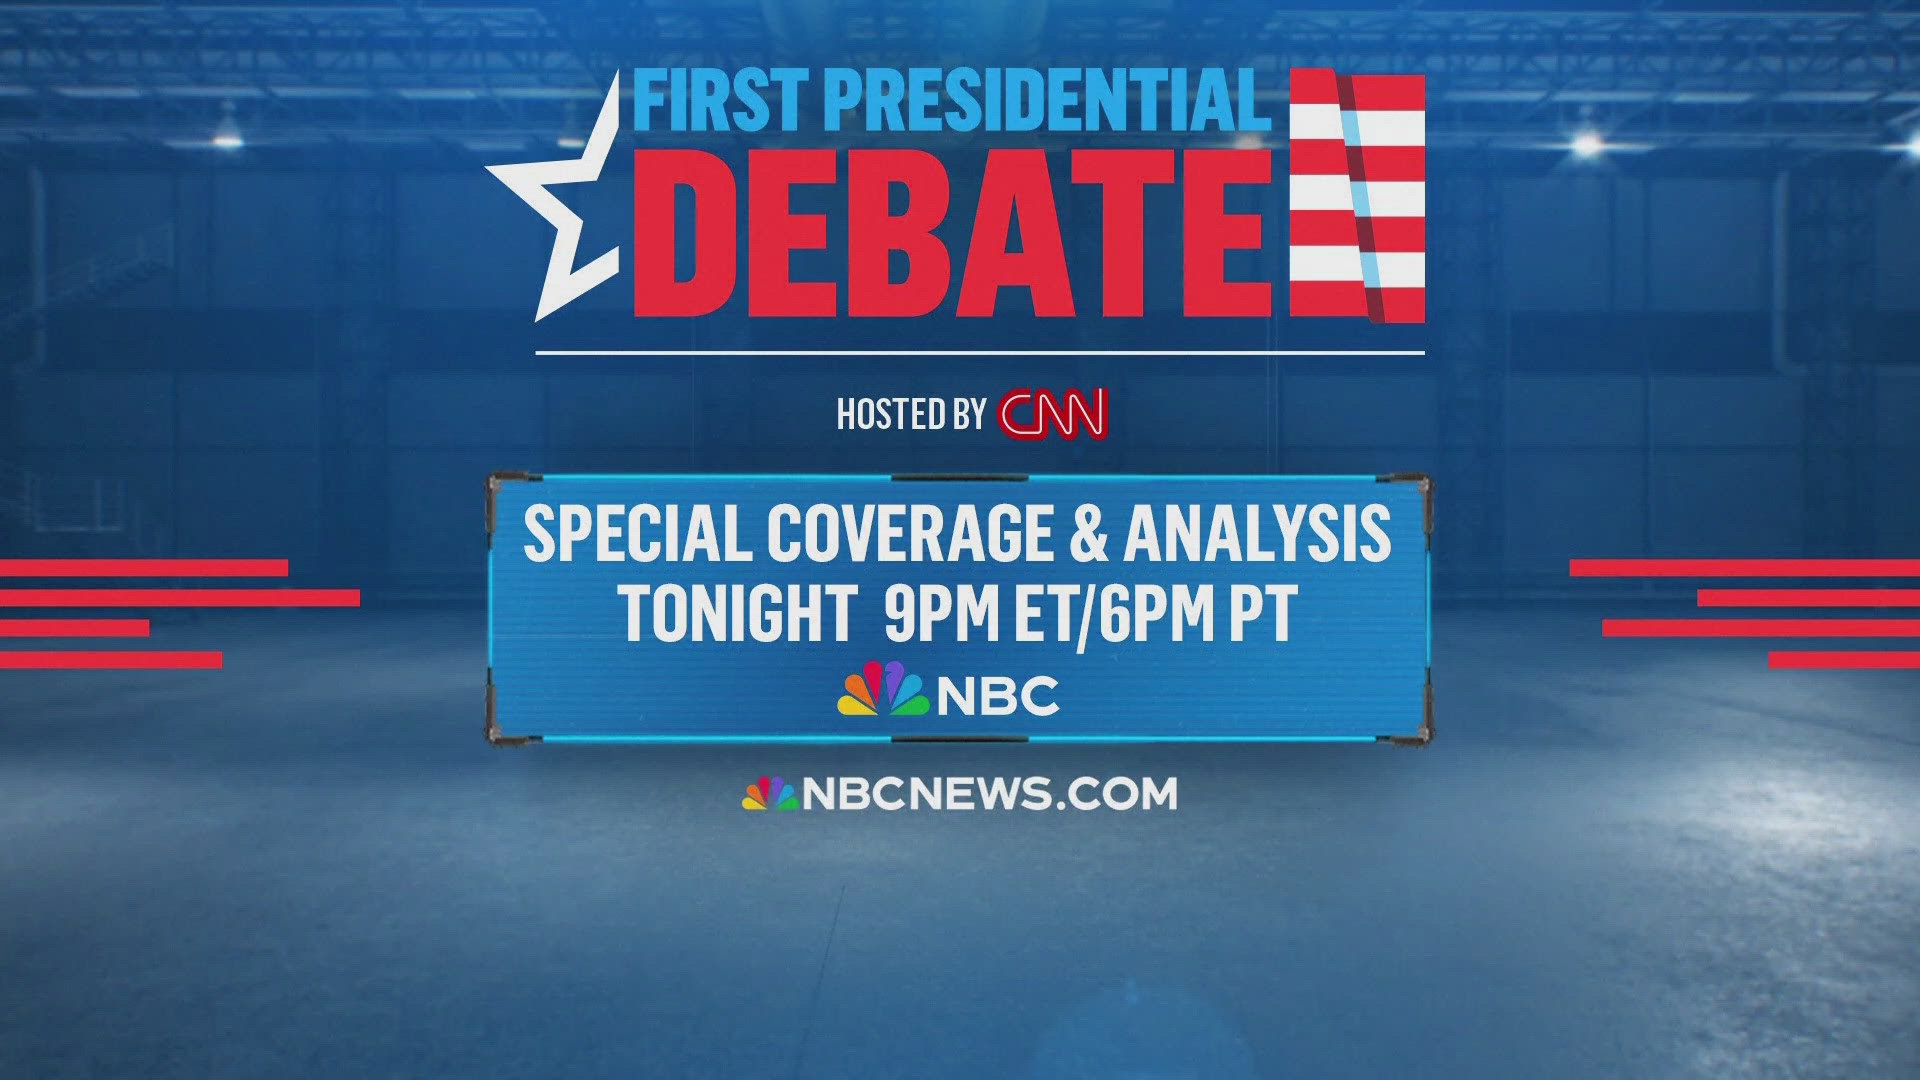 A look ahead at the first Presidential debate